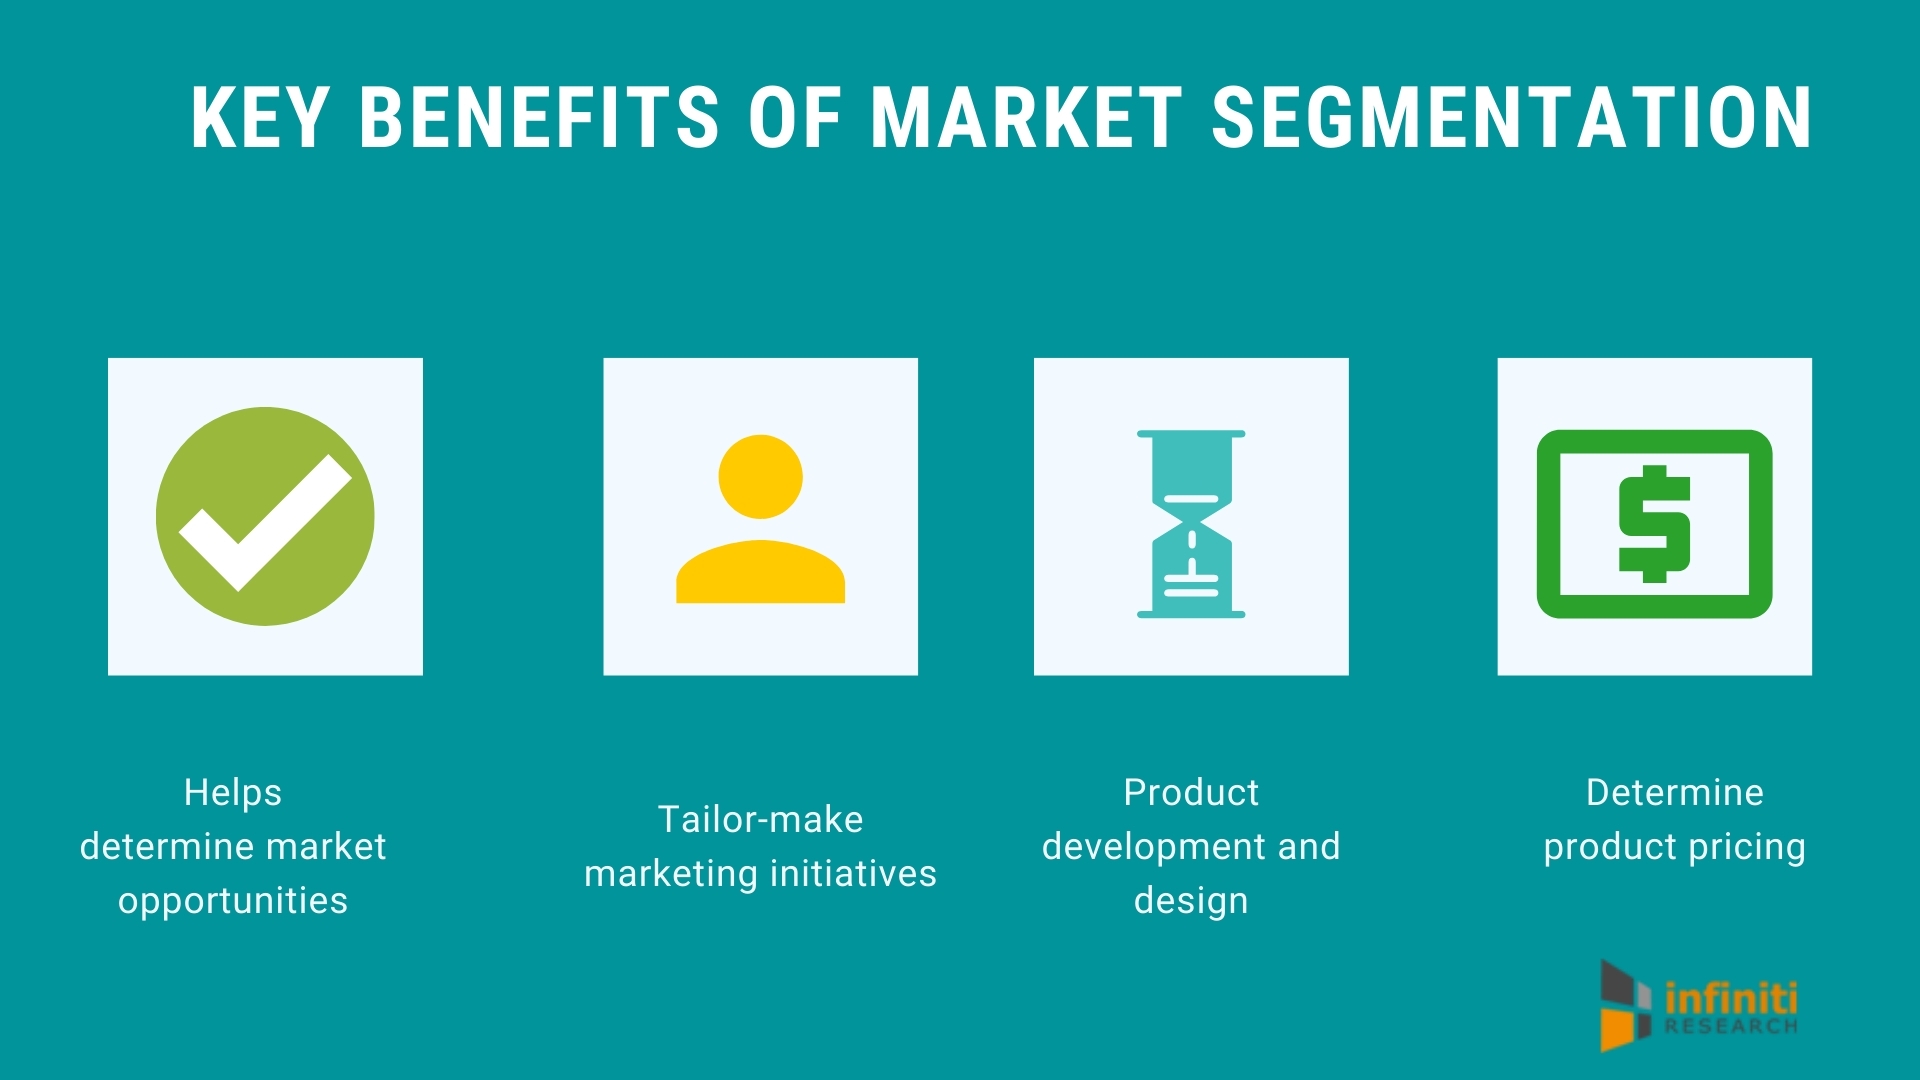 Using Market Segmentation to Generate Sustained Growth - Our Analysts'  Insights